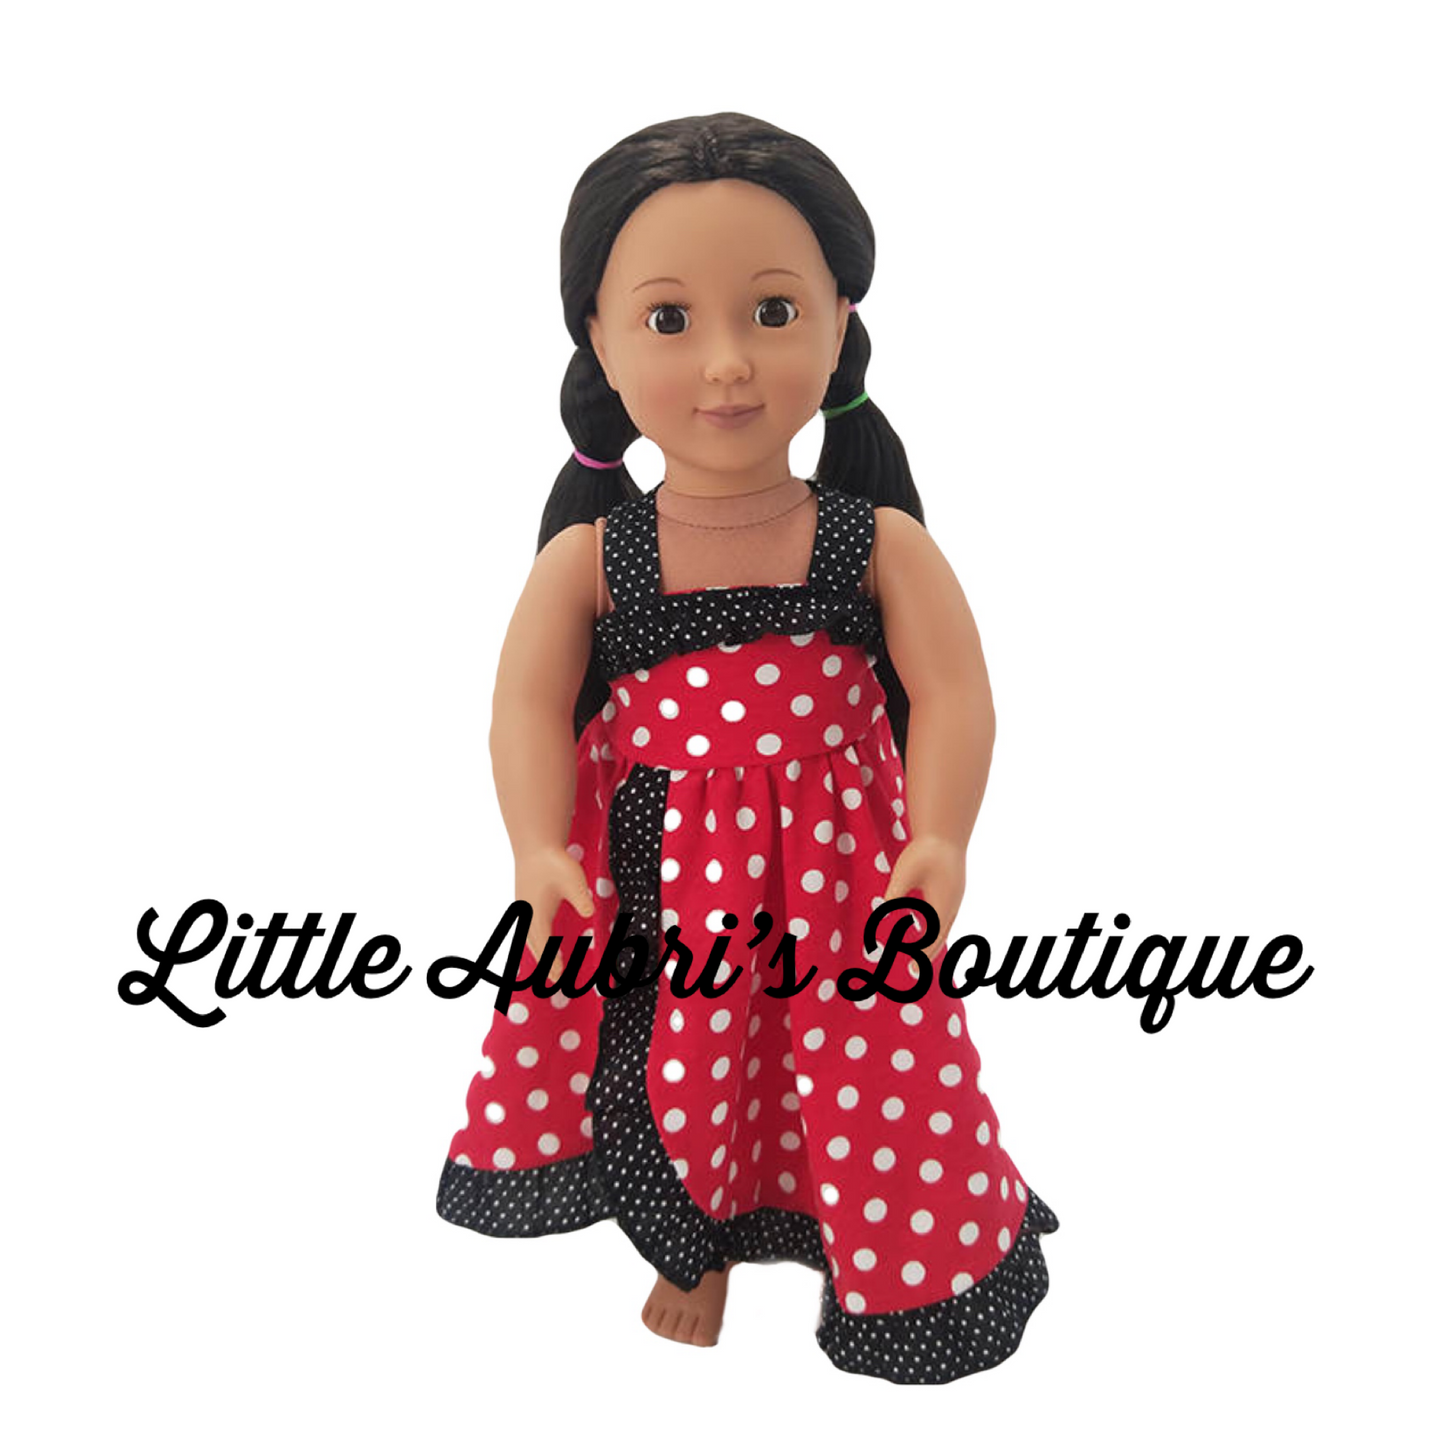 PREORDER Polka Dot Mouse 18 in. Doll Dress CLOSES 3/8